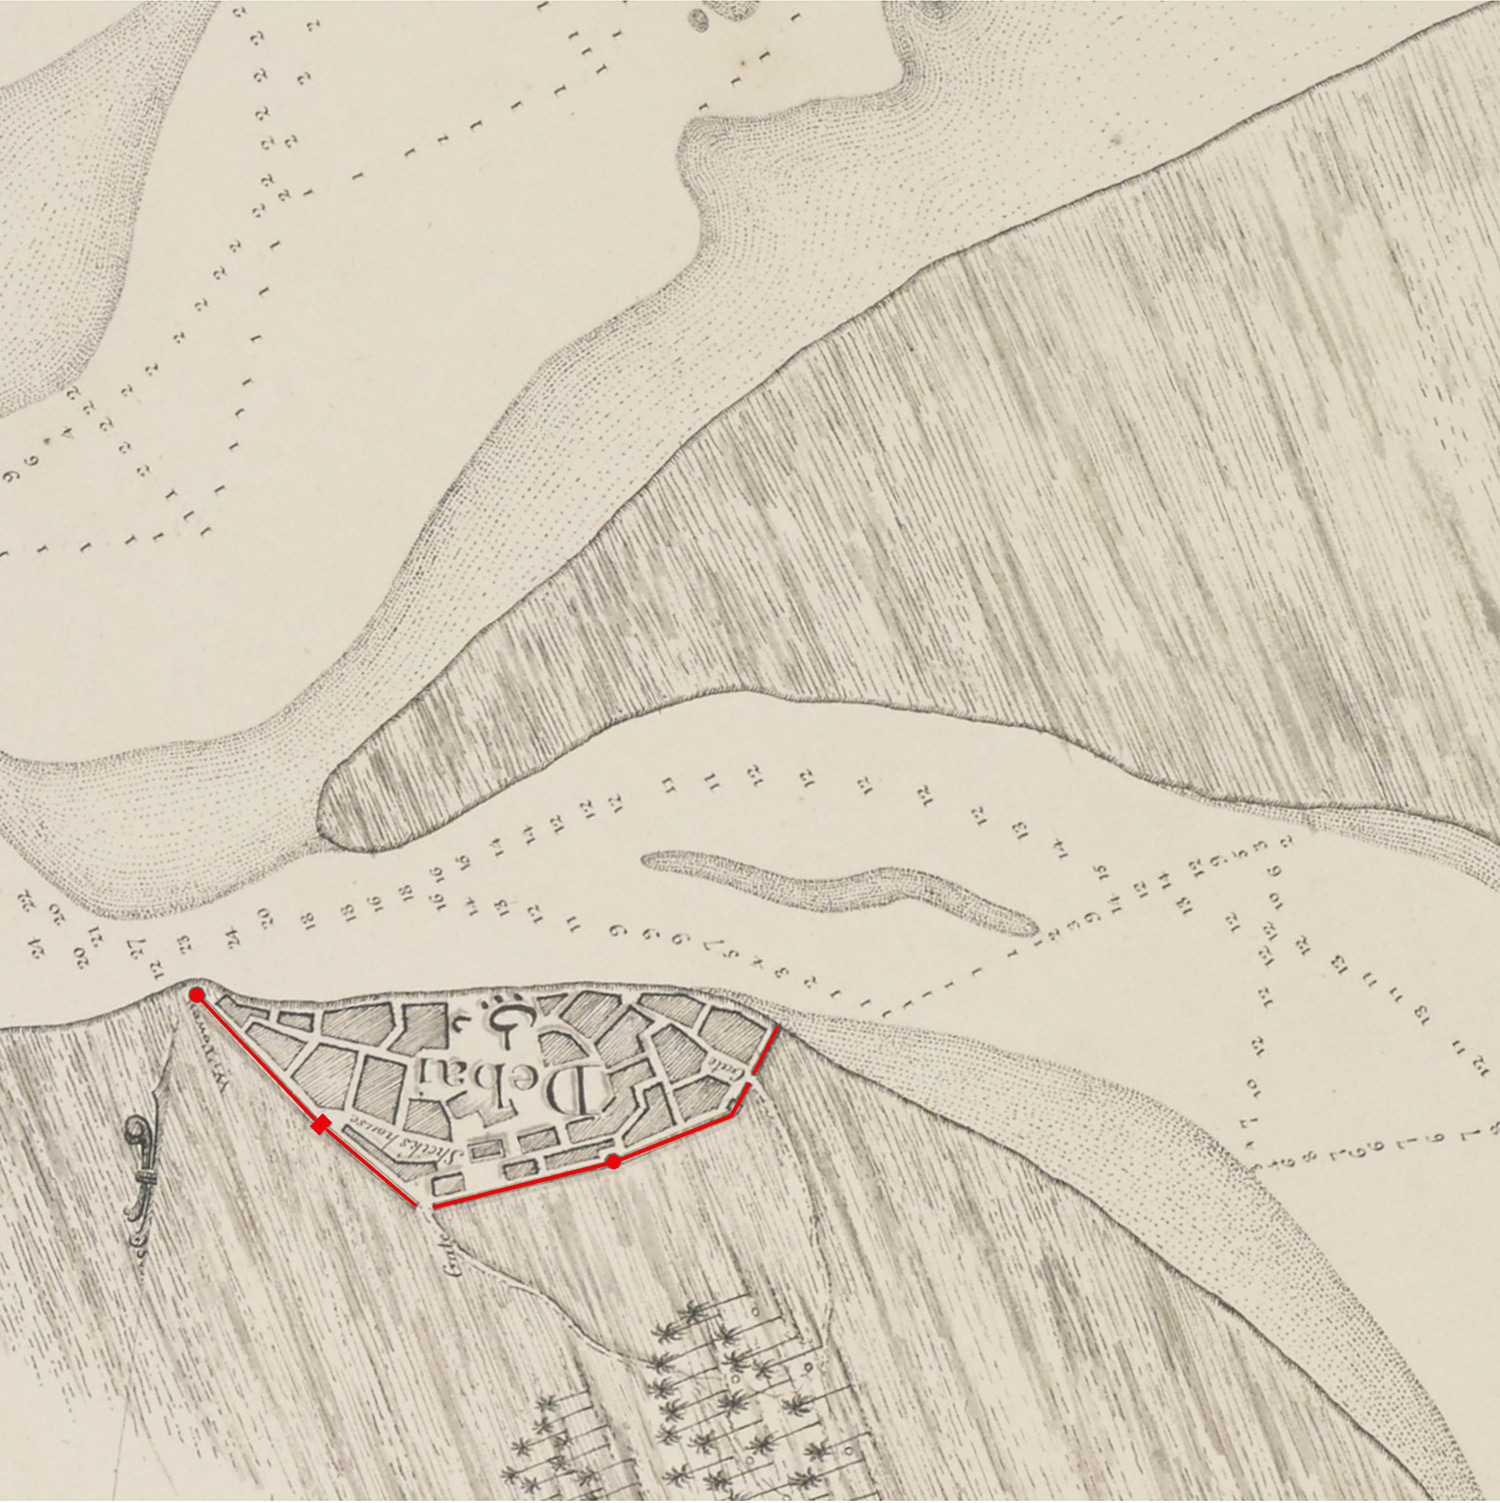  Map detail from ‘Trigonometrical Plan of the Back-water of DEBAI’ by Lieut. R. Cogan’s map, 1822  Highlighted in Red is the historic Path of Boundary wall around ‘DEBAI’, Source: http://www.sheikhmohammed.com 